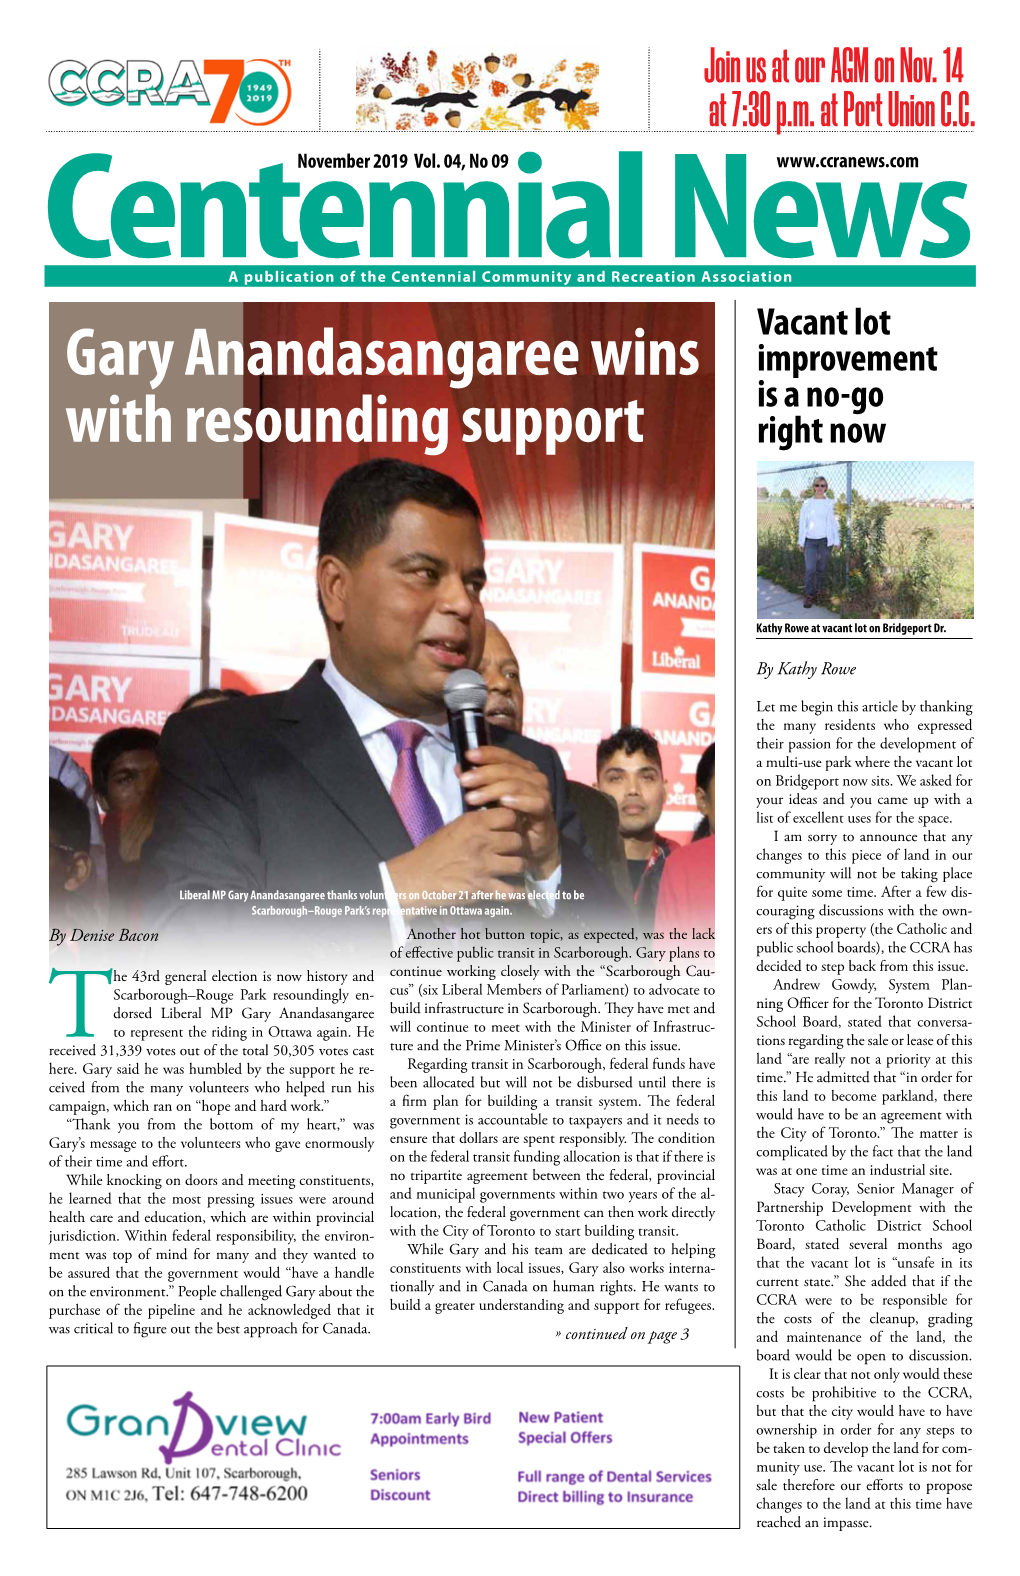 Gary Anandasangaree Wins Improvement Is a No-Go with Resounding Support Right Now